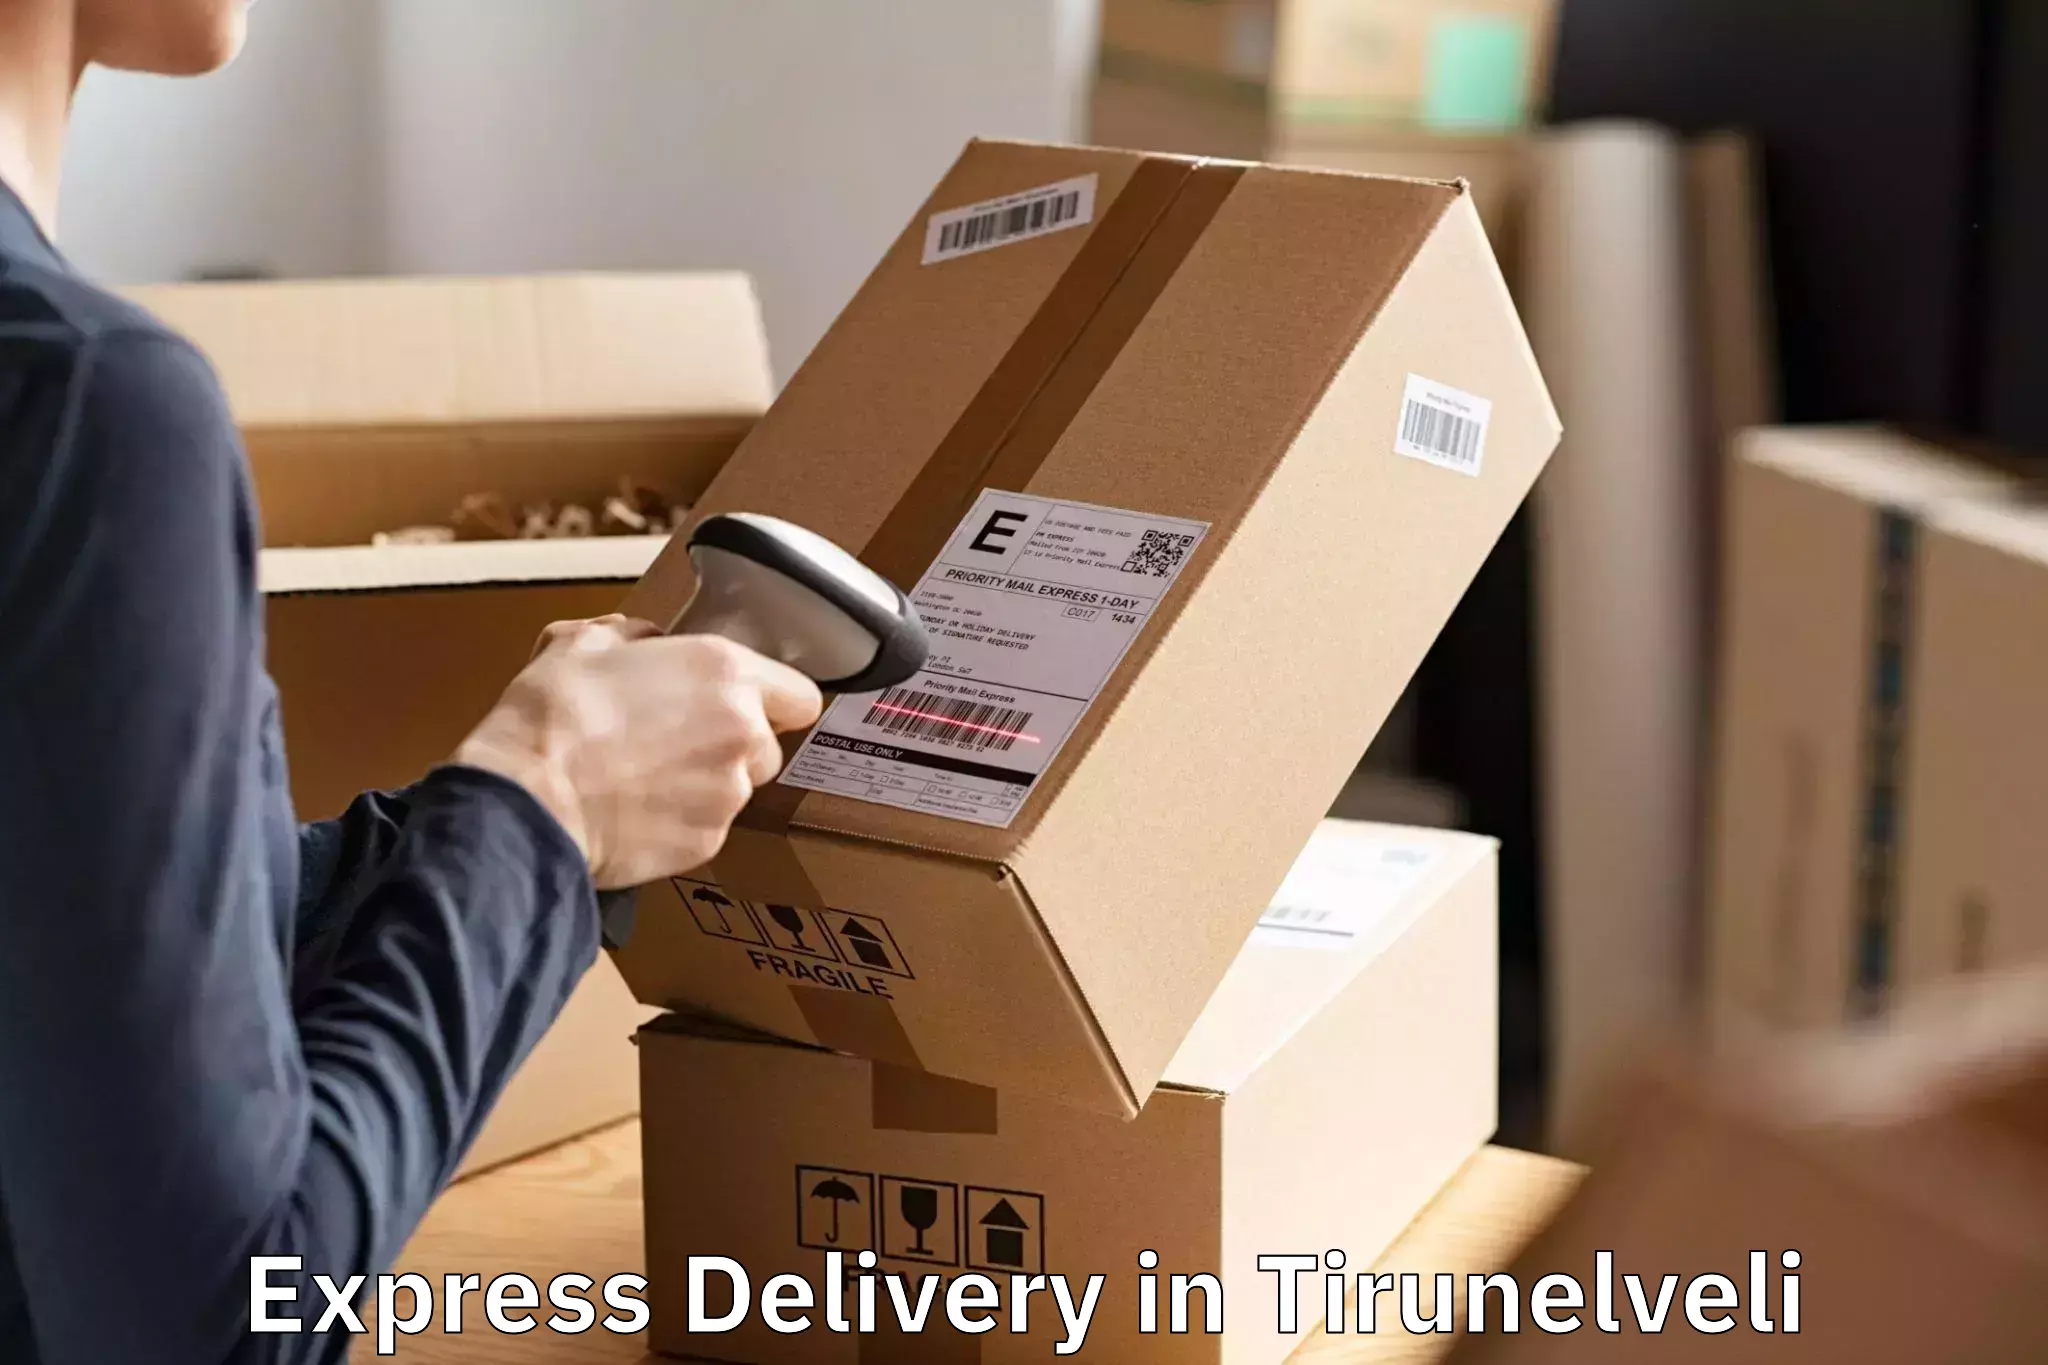 Easy Express Delivery Booking in Tirunelveli, Tamil Nadu (TN)